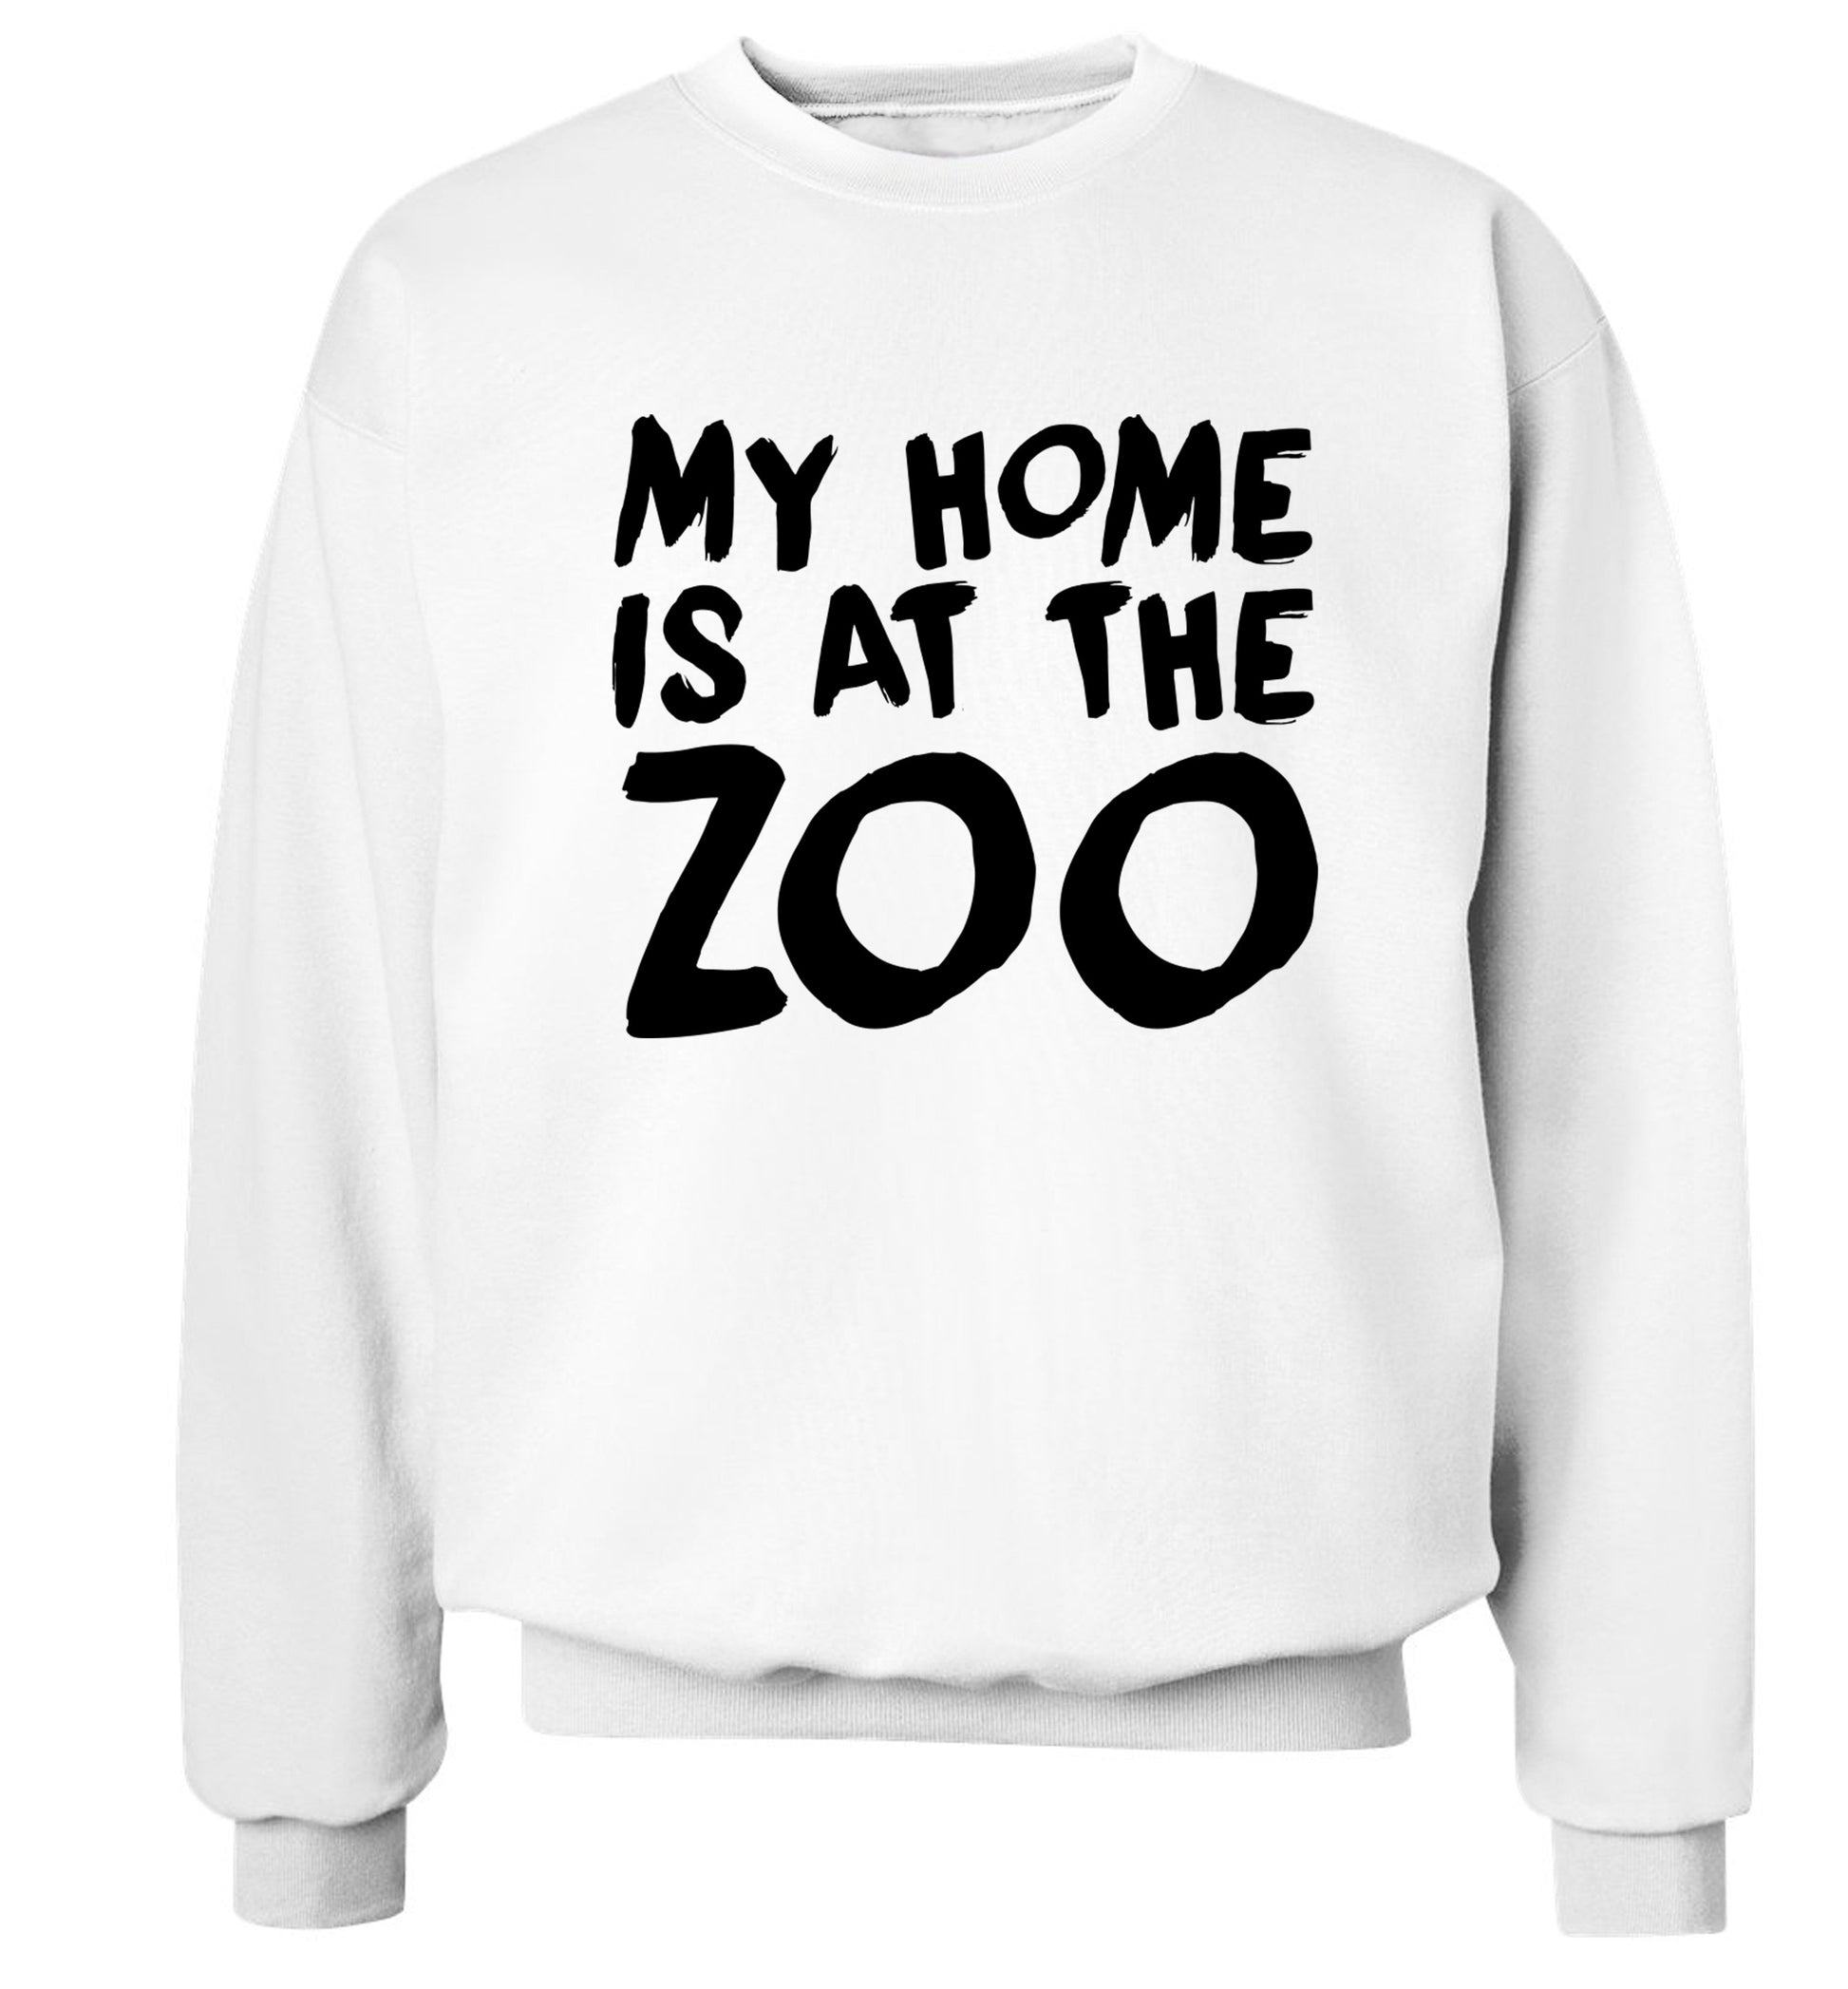 My home is at the zoo Adult's unisex white Sweater 2XL